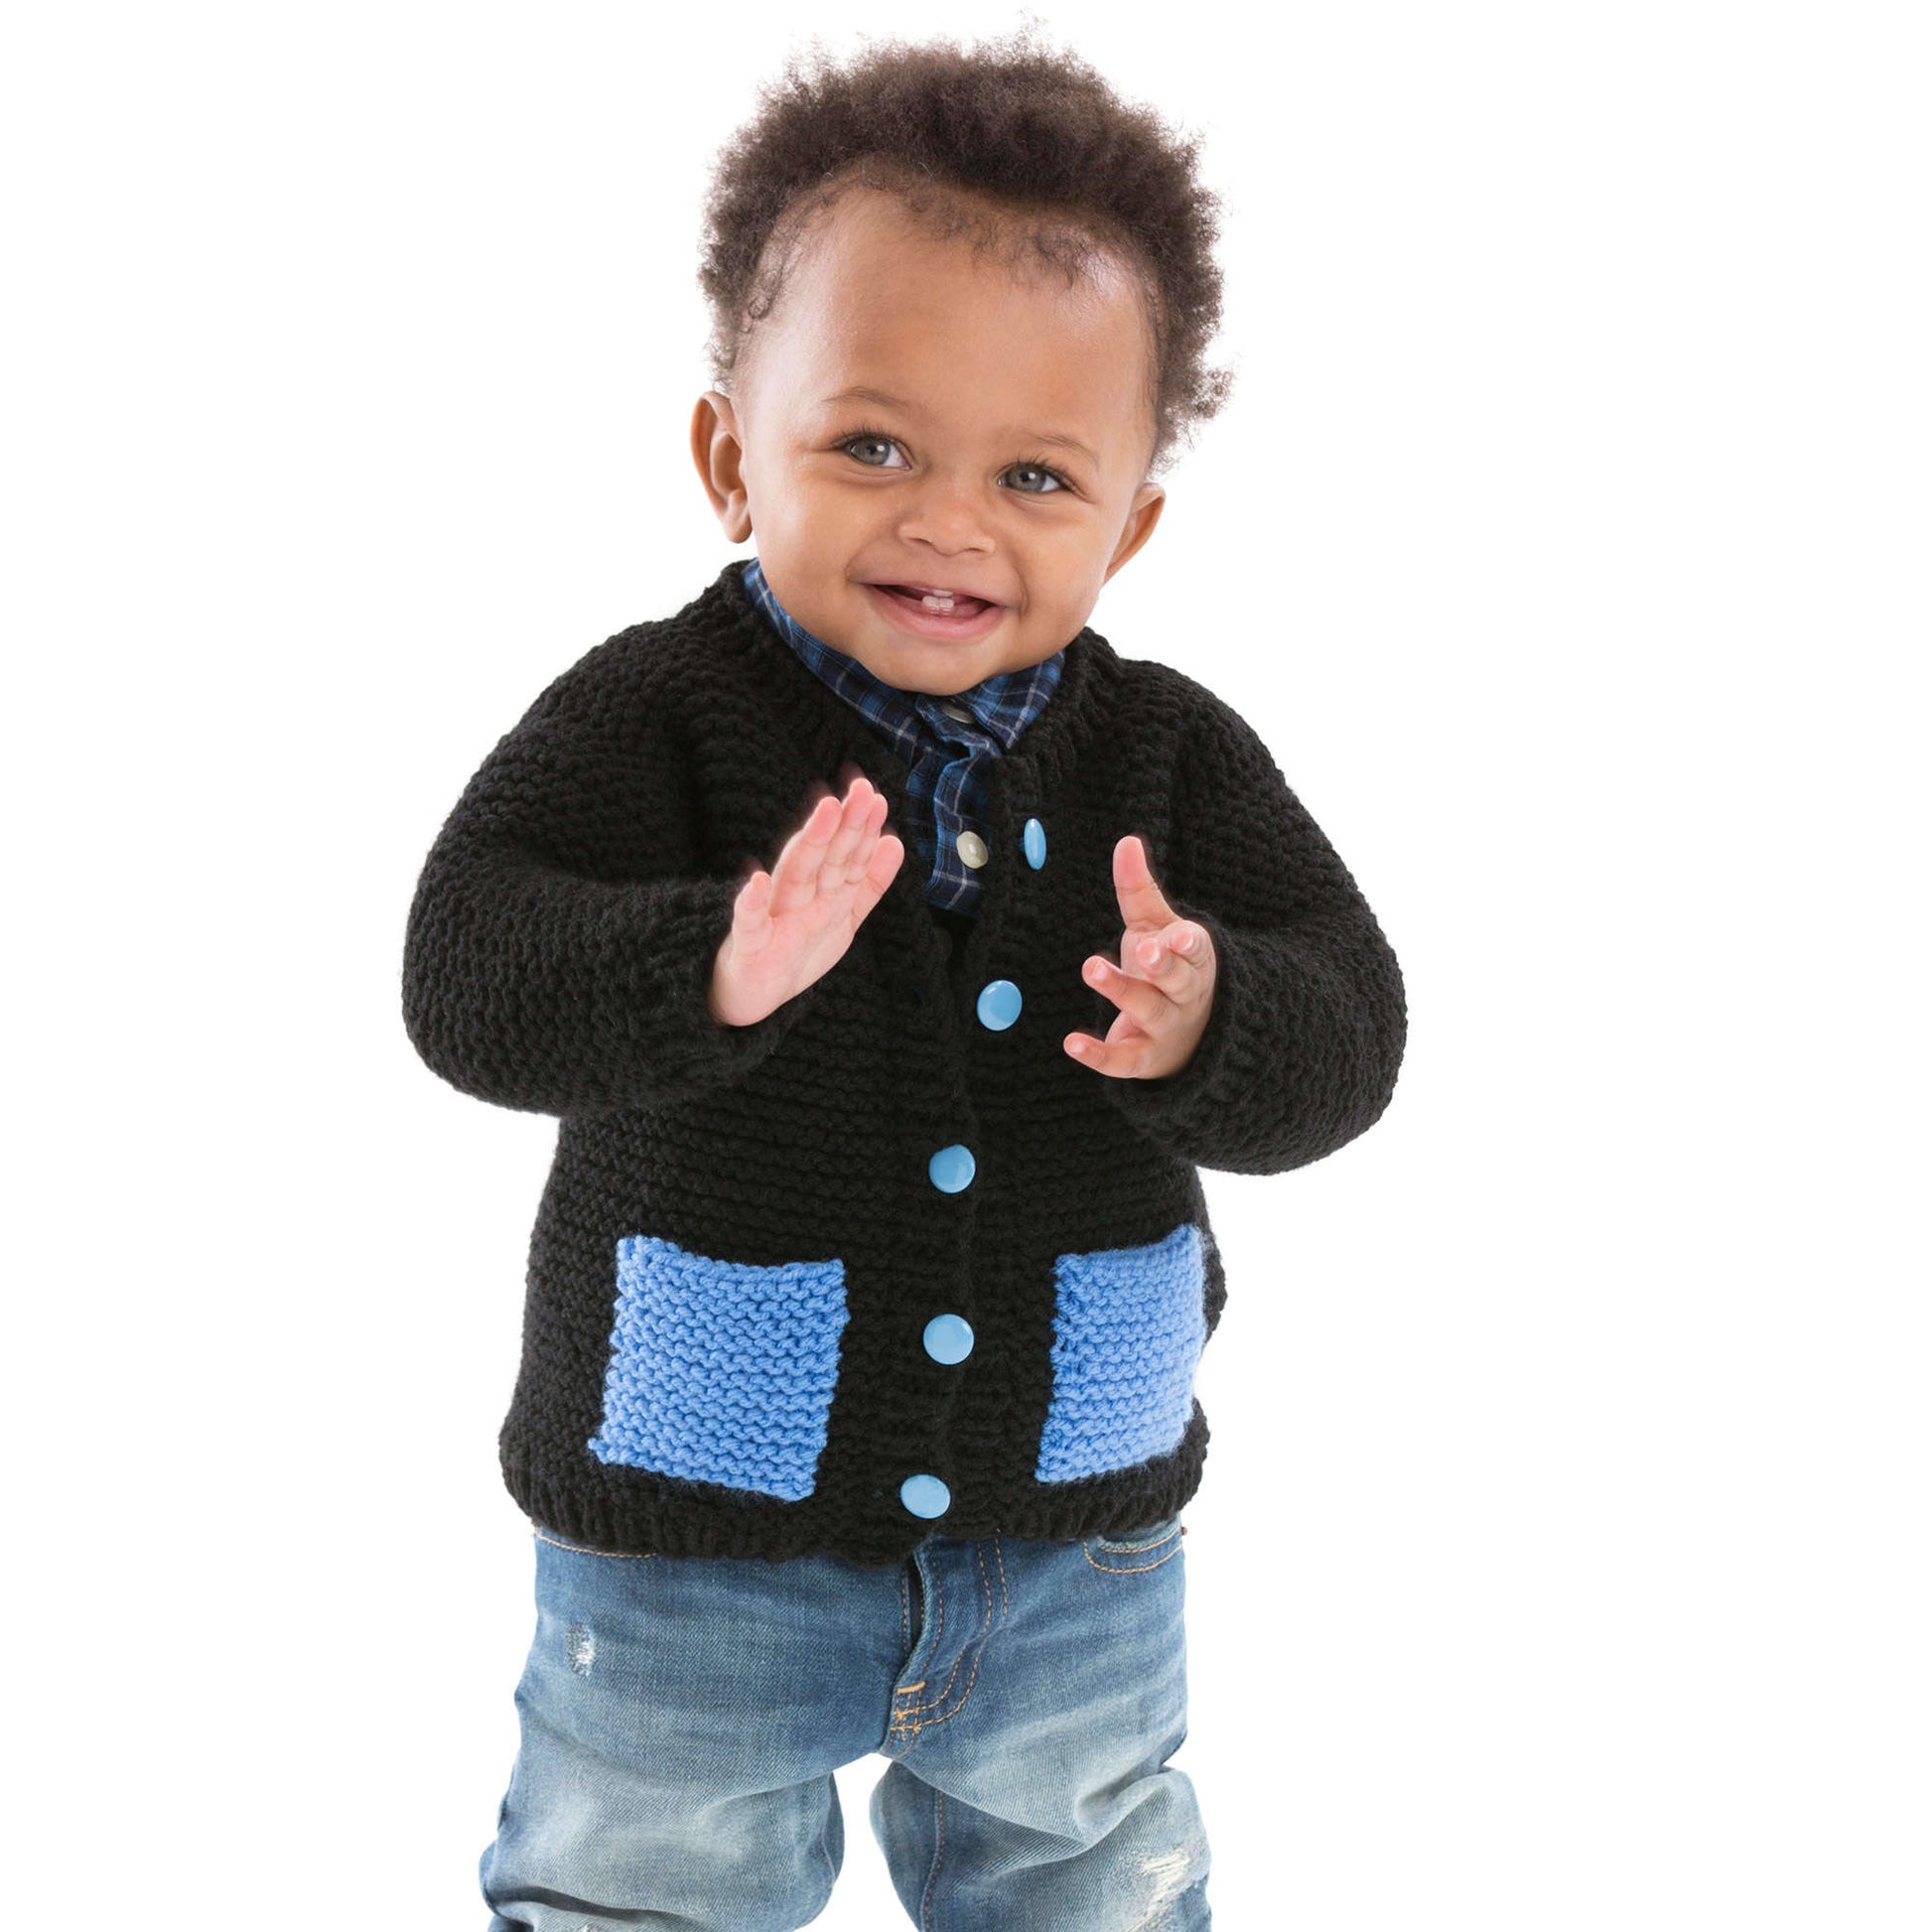 Free Red Heart Cute & Classic Baby Knit Cardigan Pattern